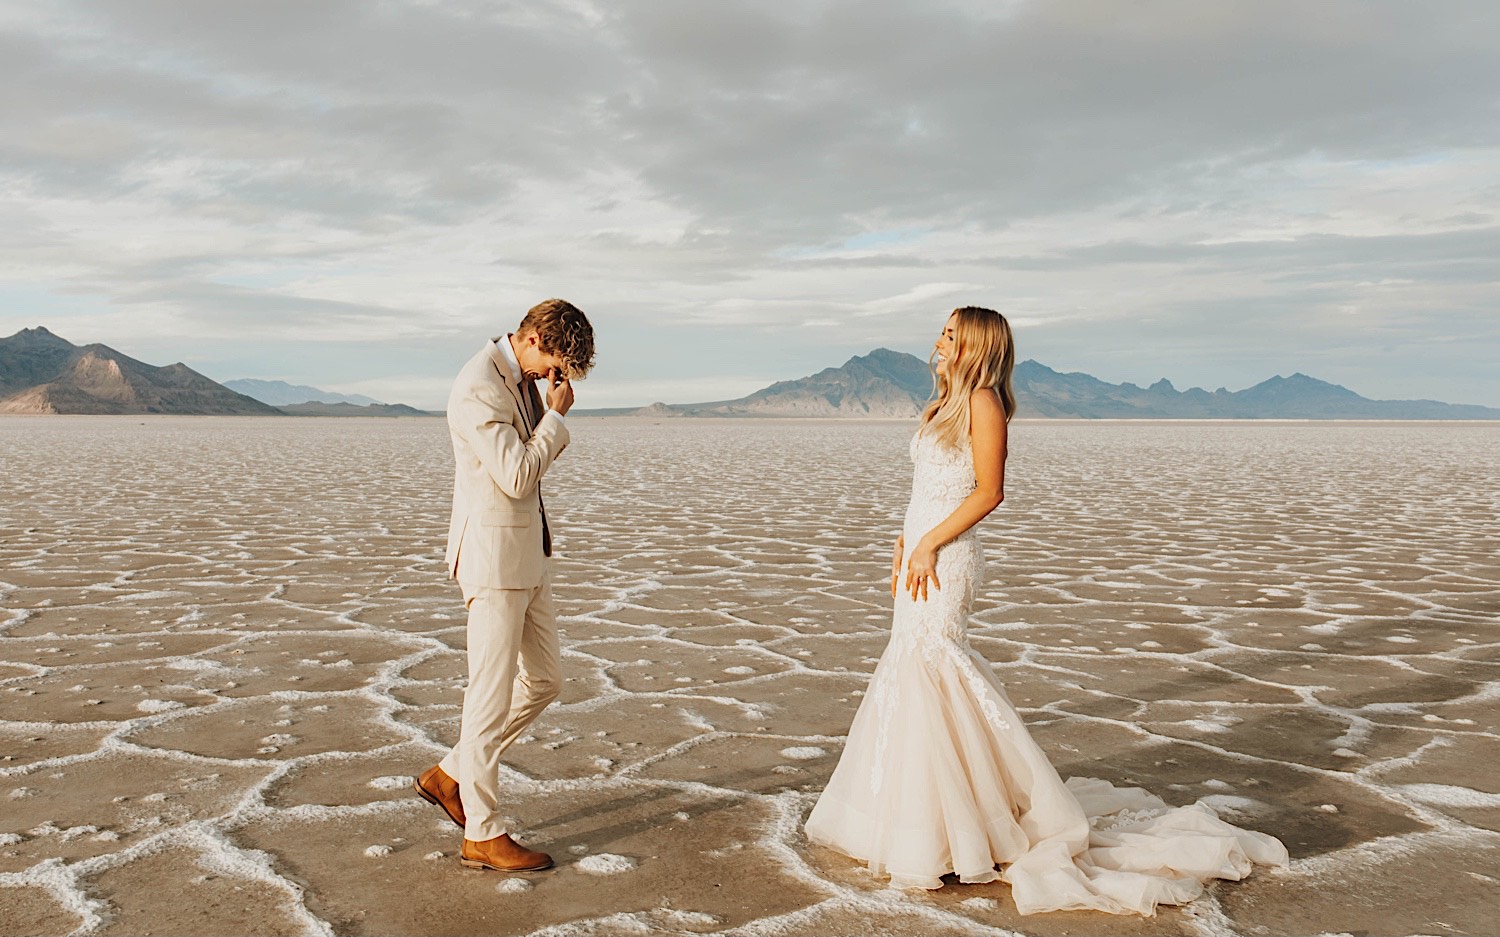 In the Utah Salt Flats, a groom gets emotional seeing the bride for the first time as she smiles at him before their elopement ceremony